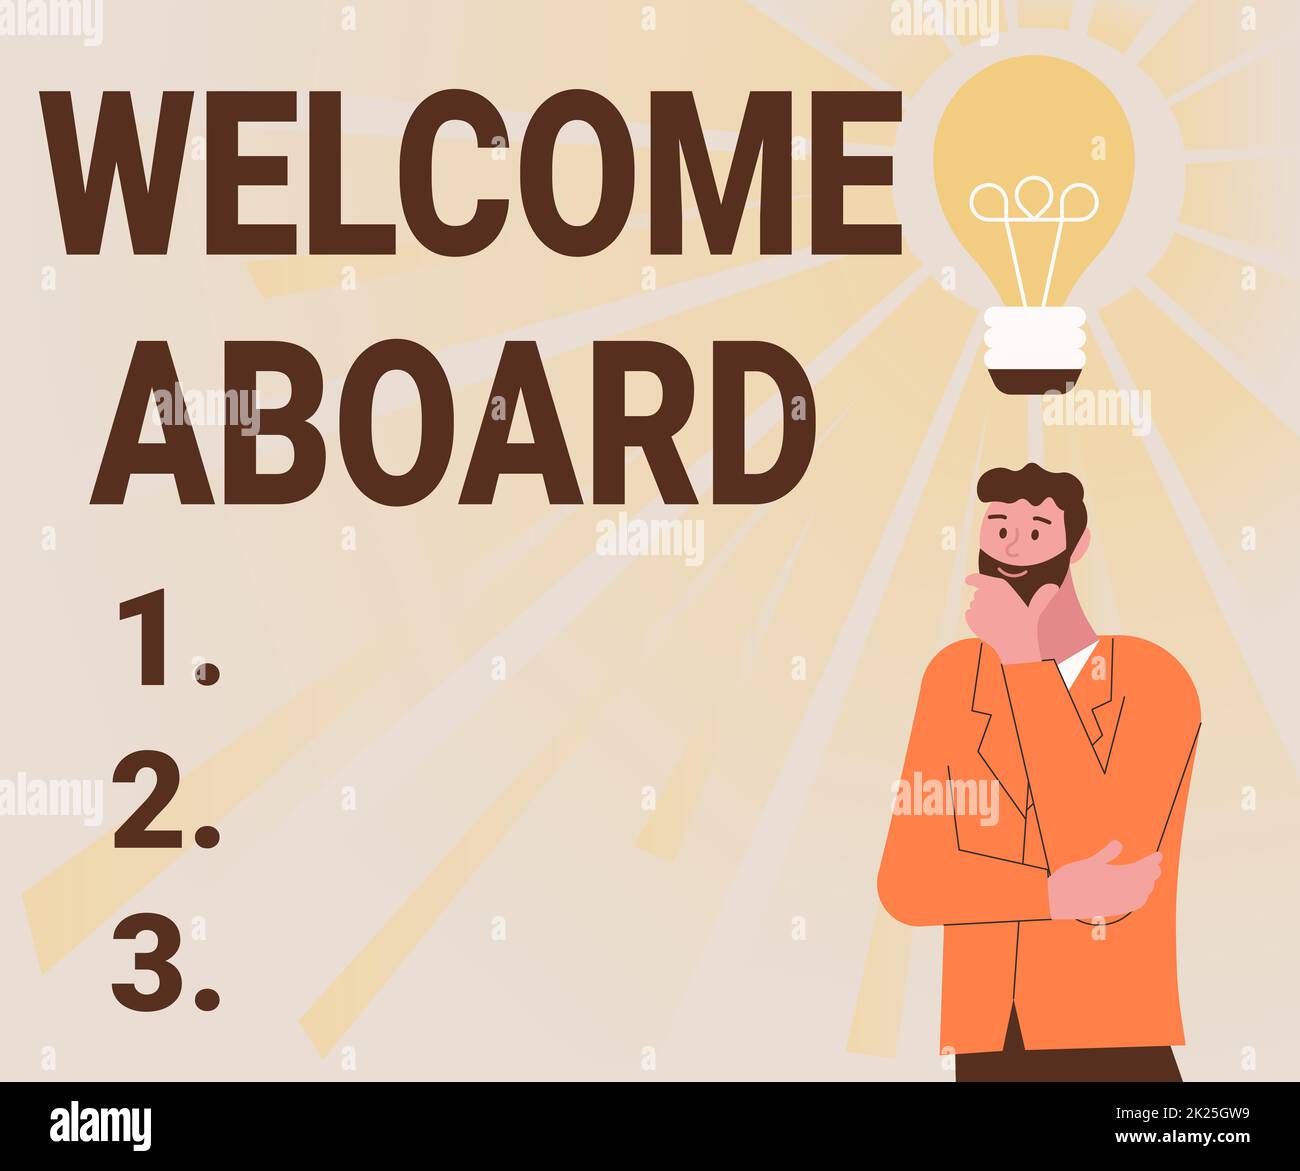 Text sign showing Welcome Aboard. Business idea Expression of greetings to a person whose arrived is desired Illustration Of A Man Standing Coming Up With New Amazing Ideas. Stock Photo